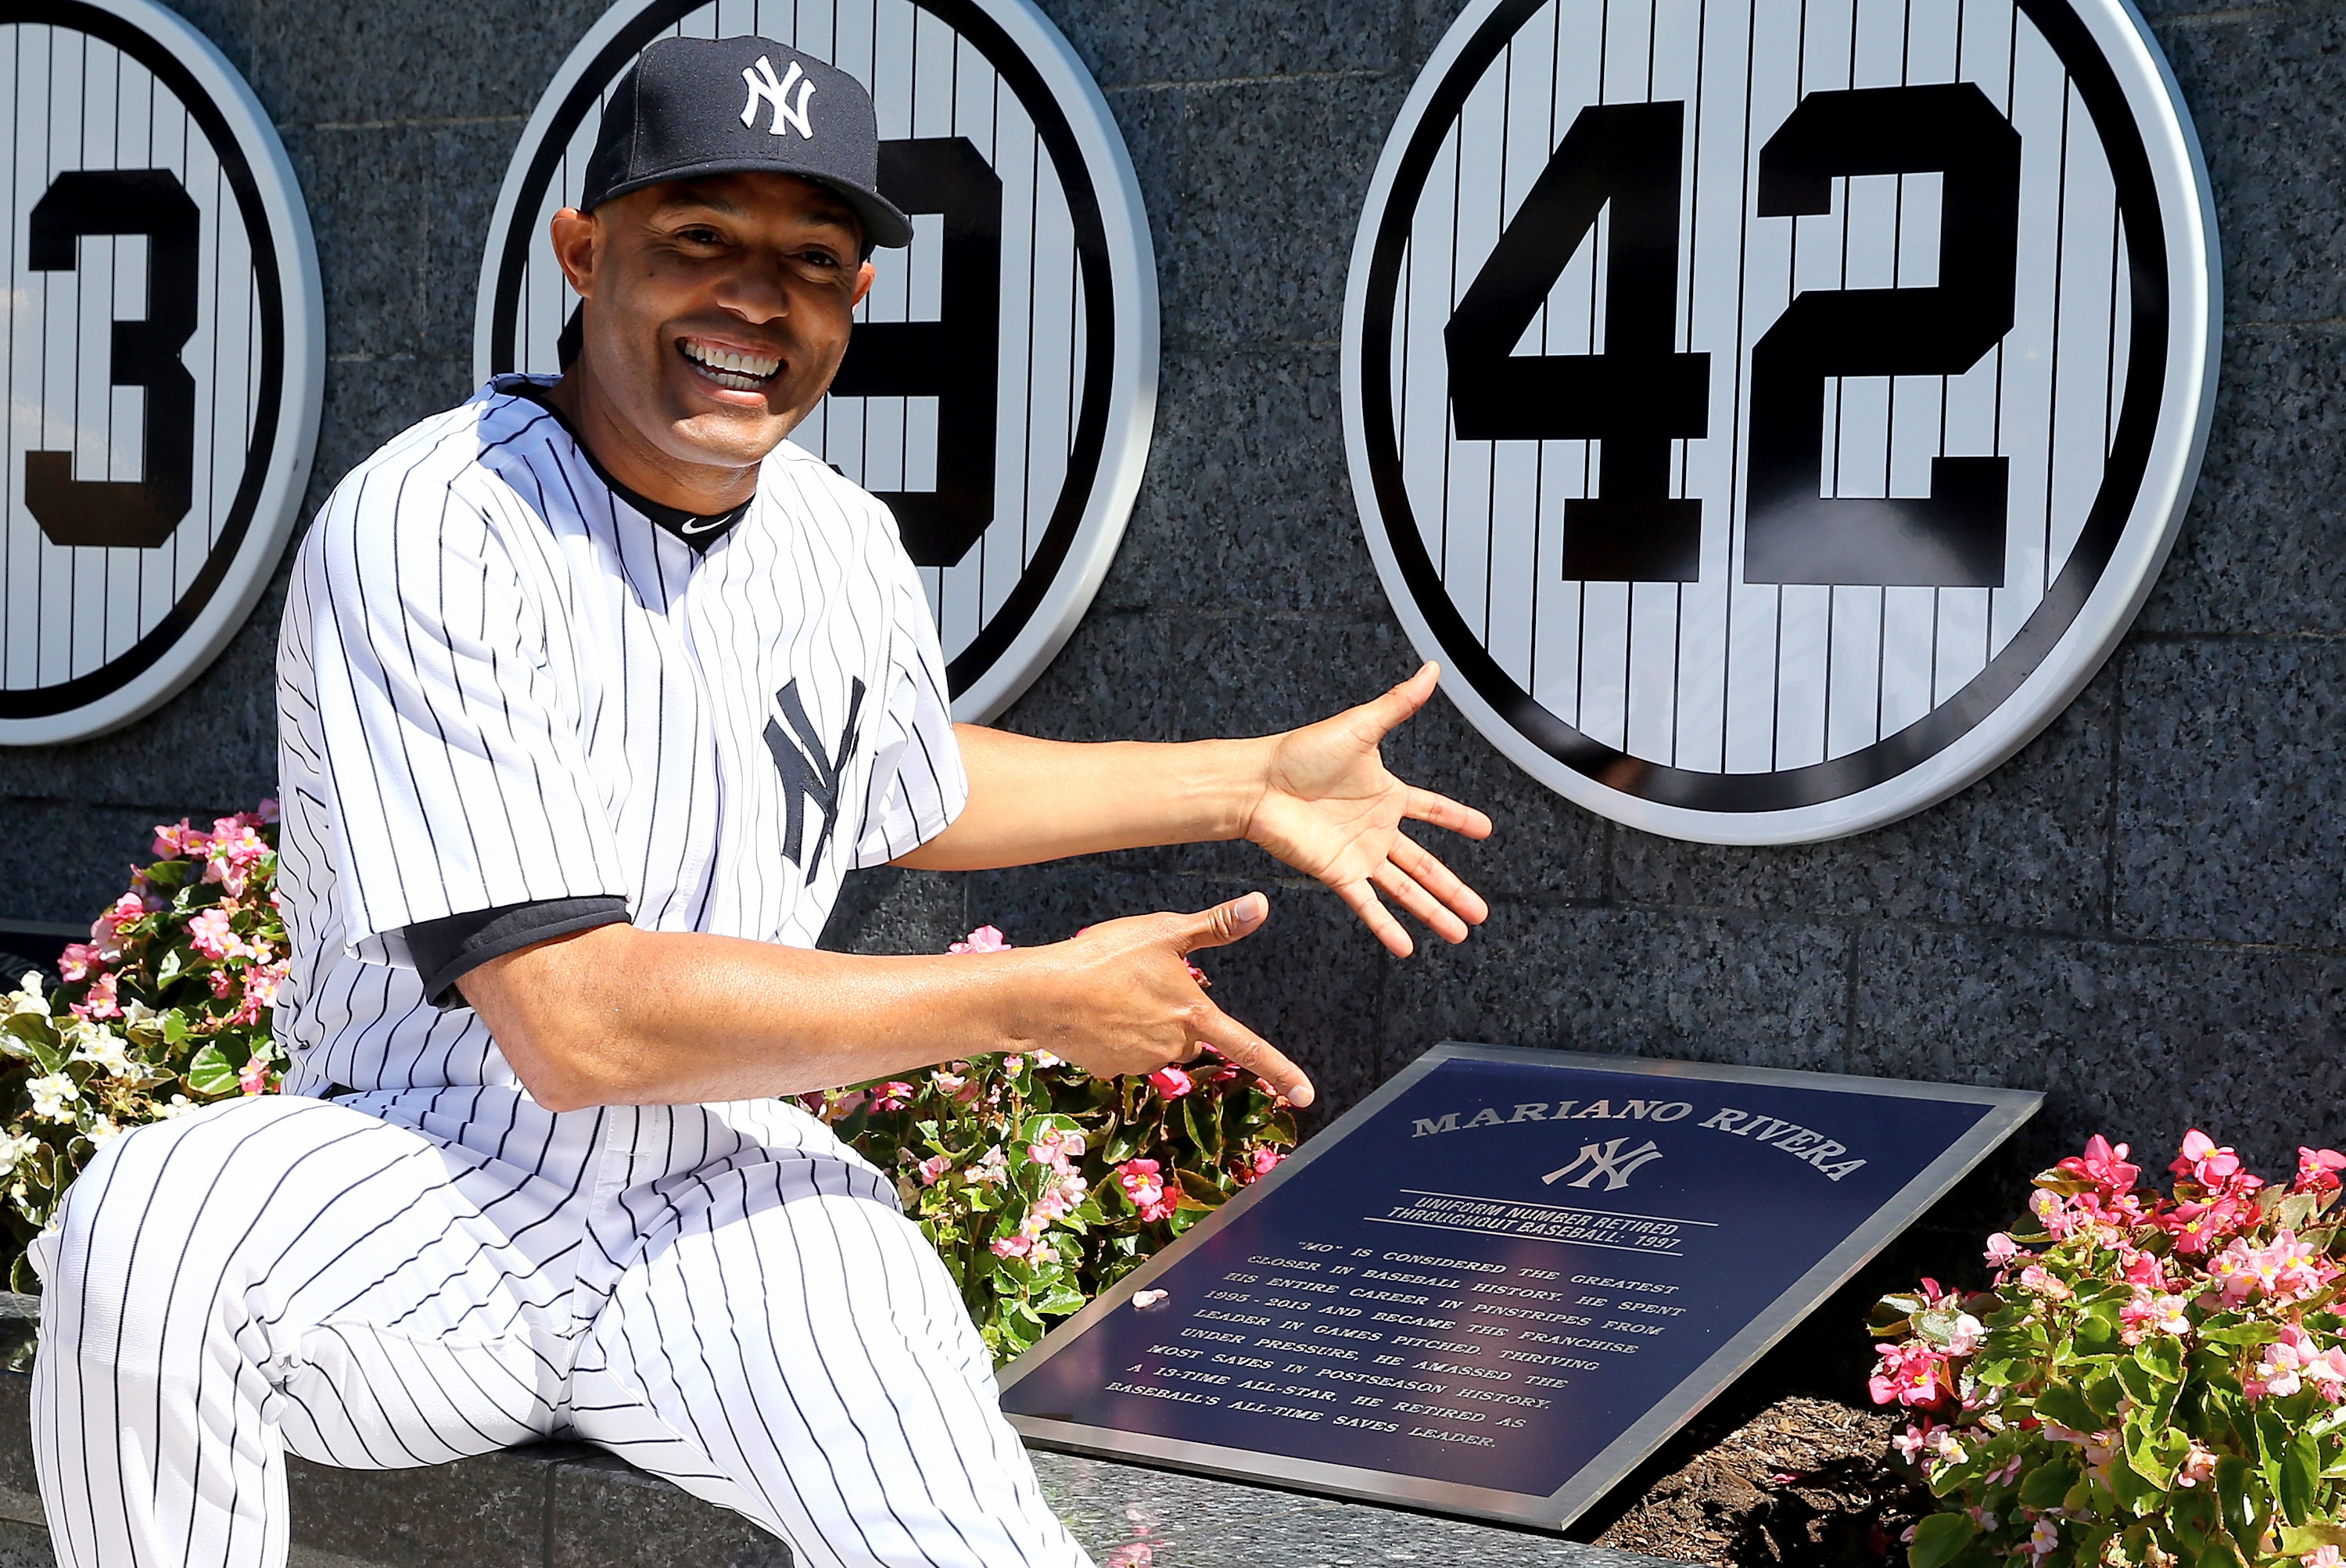 Who Else of Yankees' Dynasty Years Deserves Their Numbers Retired